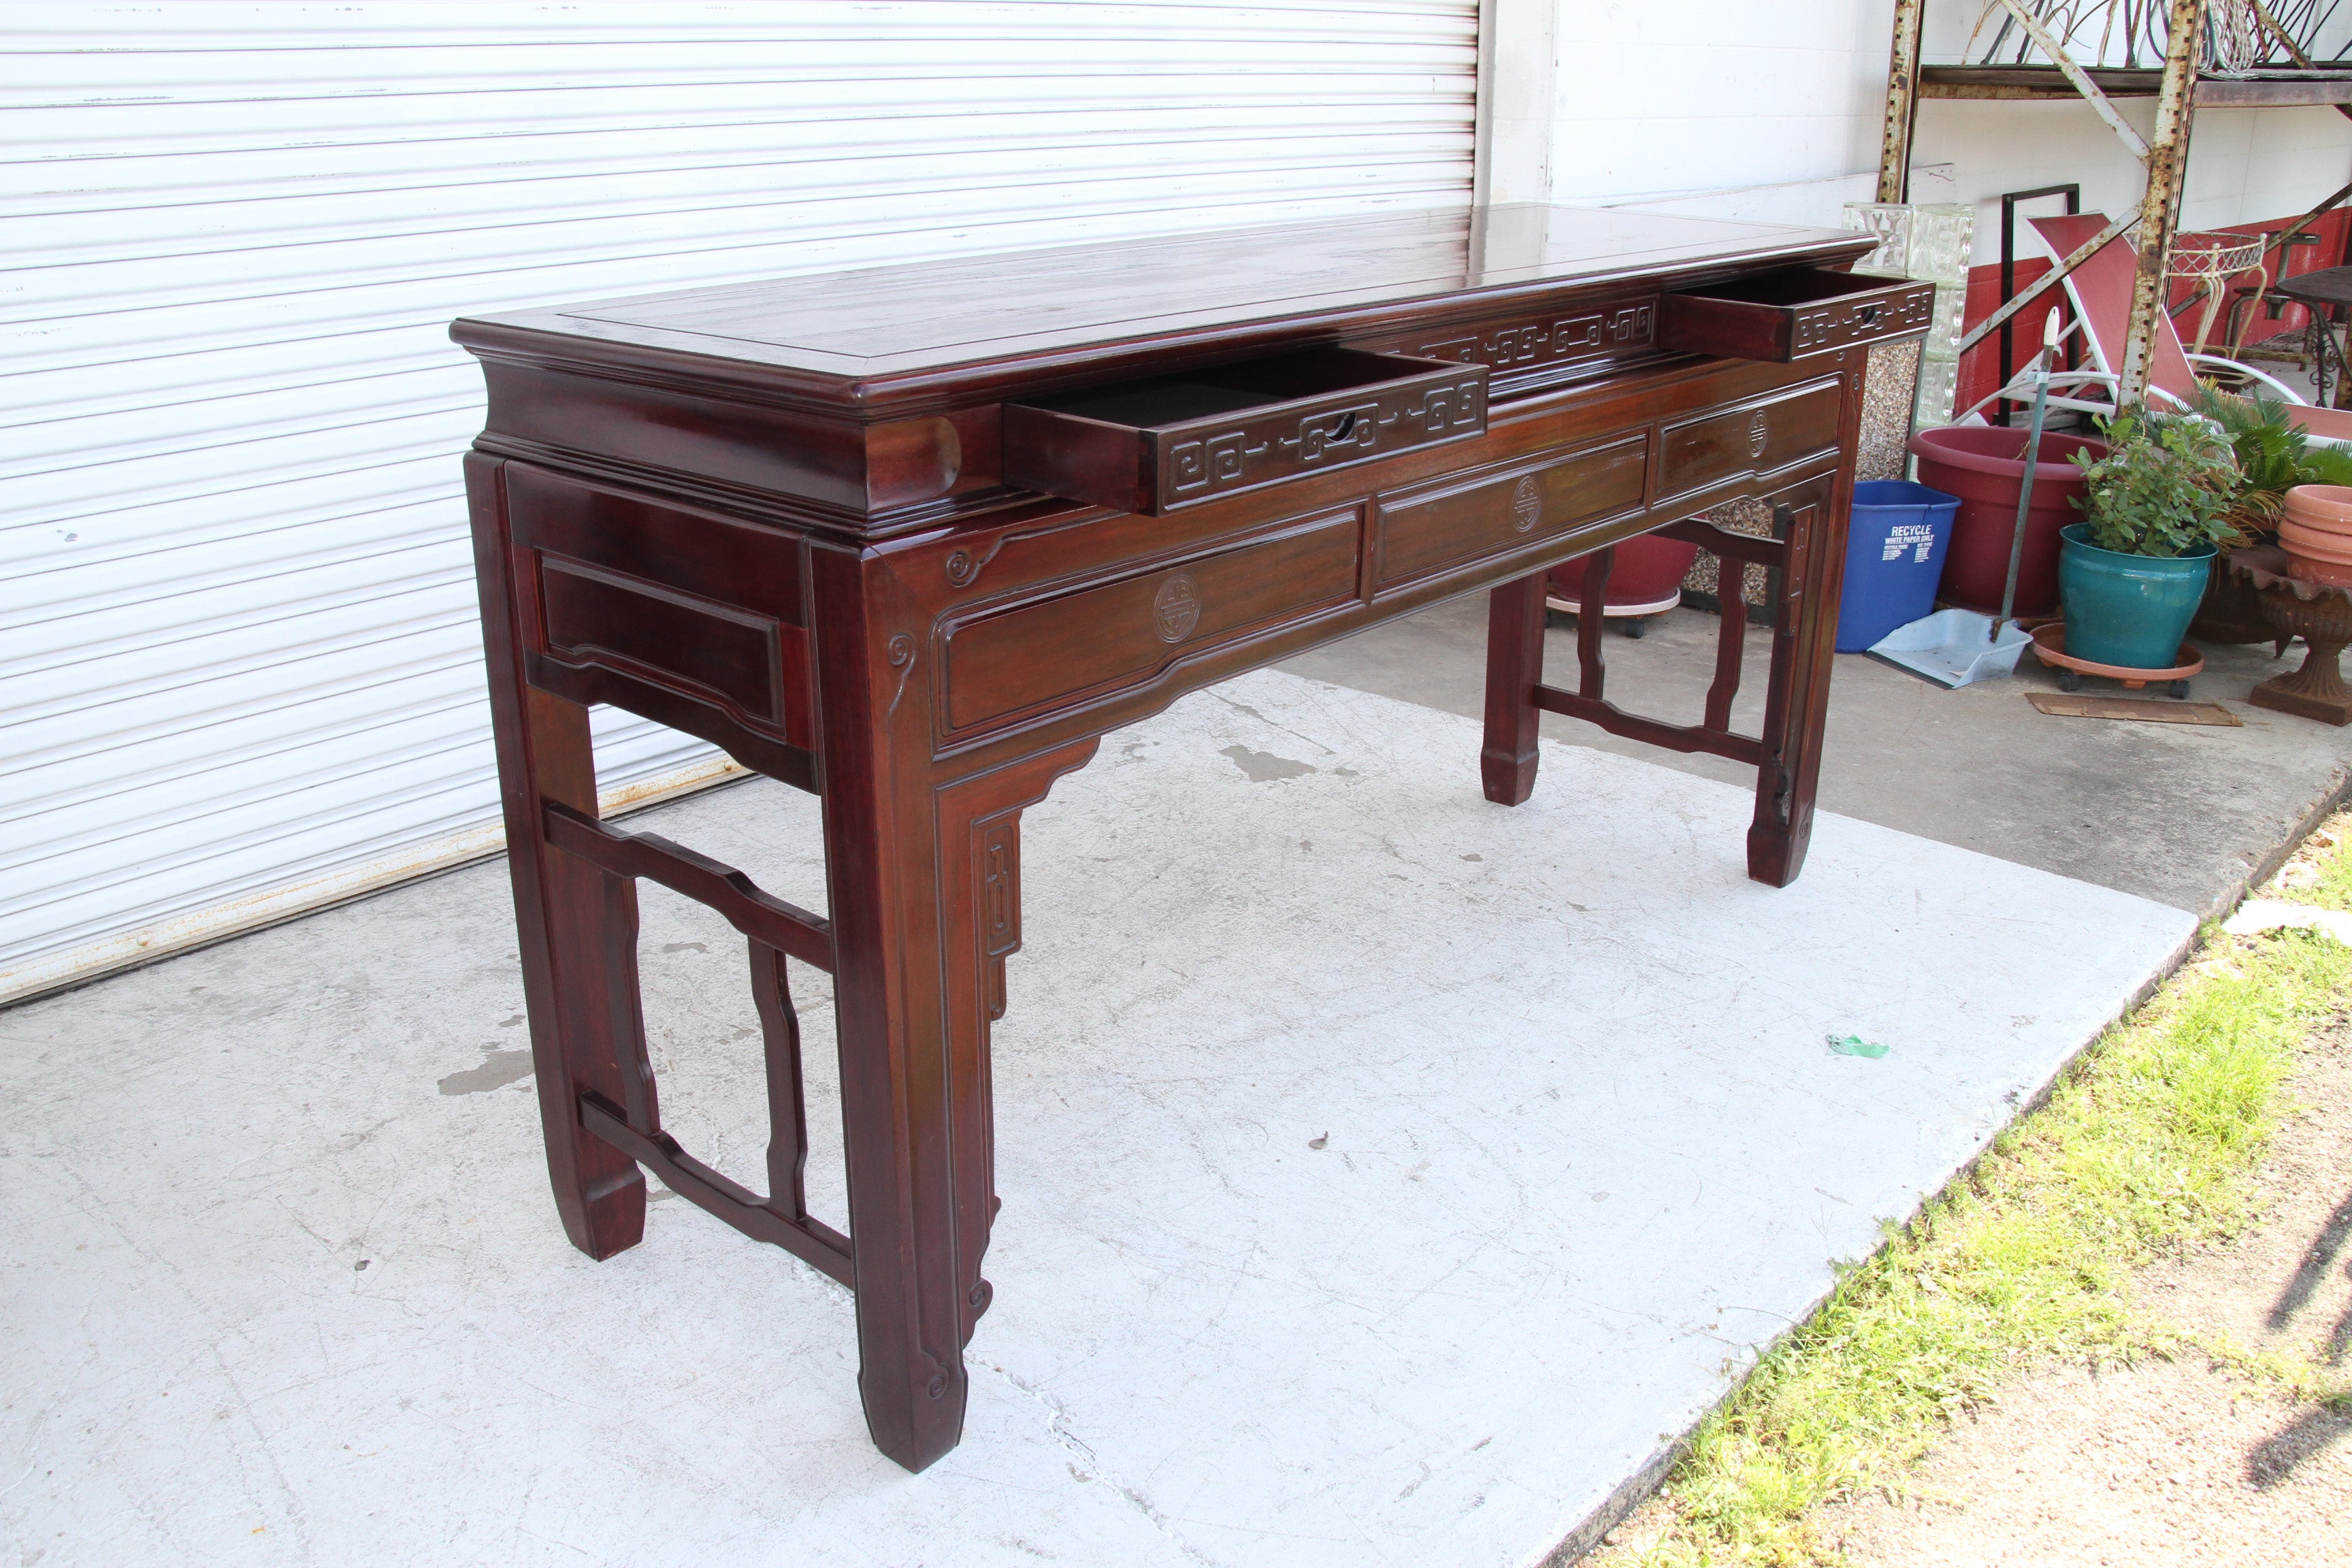 Exquisite mid century Chinese Chippendale style console table in rich mahogany with three drawers.
Decorative Chinese symbols on the drawers and apron. Use as a hall console or a bar.



